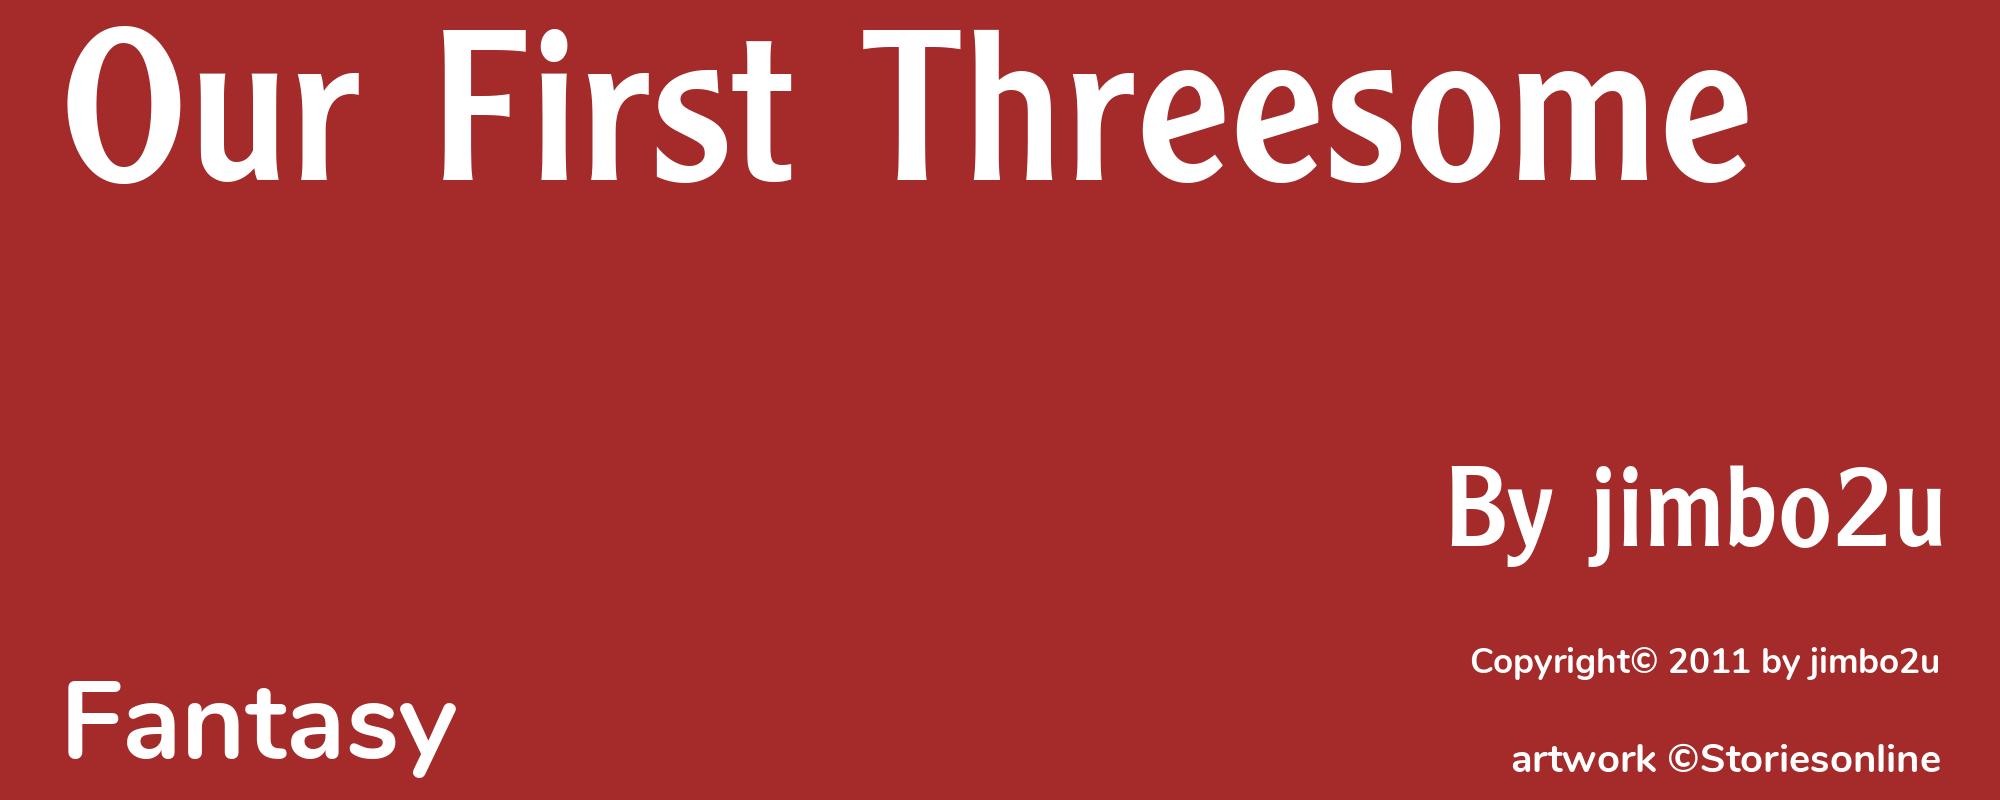 Our First Threesome - Cover